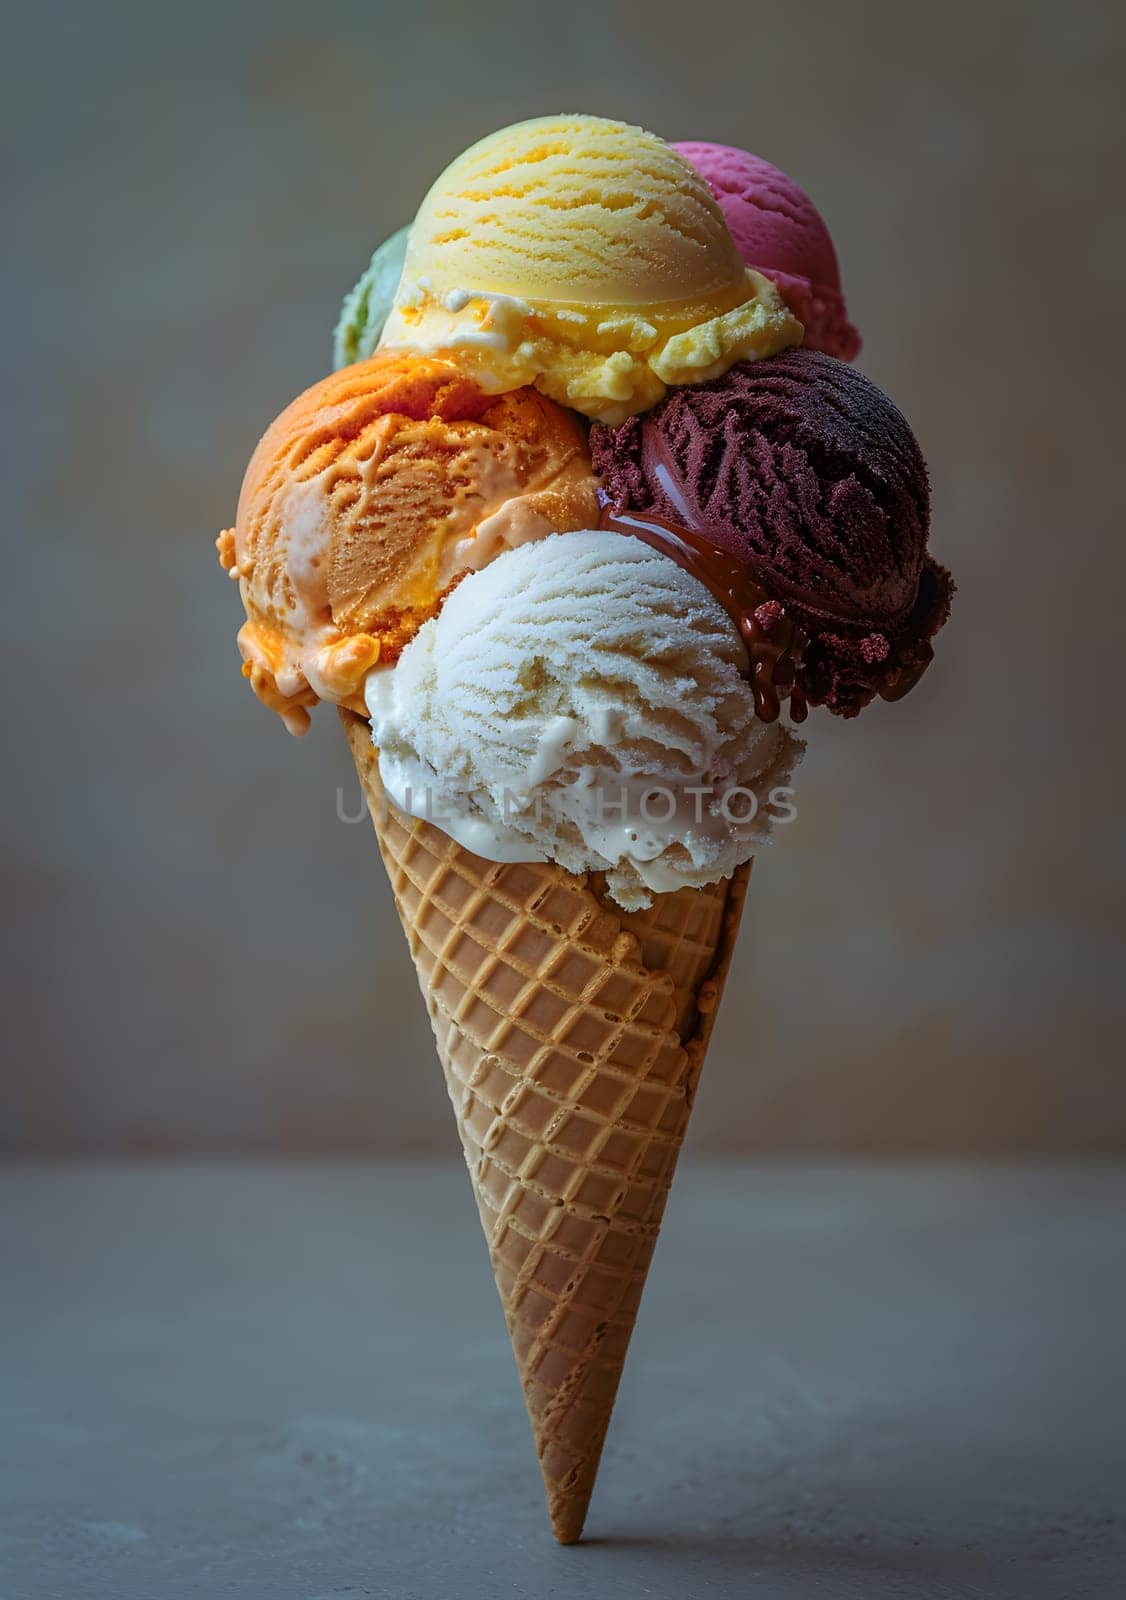 Delight in a waffle cone with an array of ice cream flavors by Nadtochiy